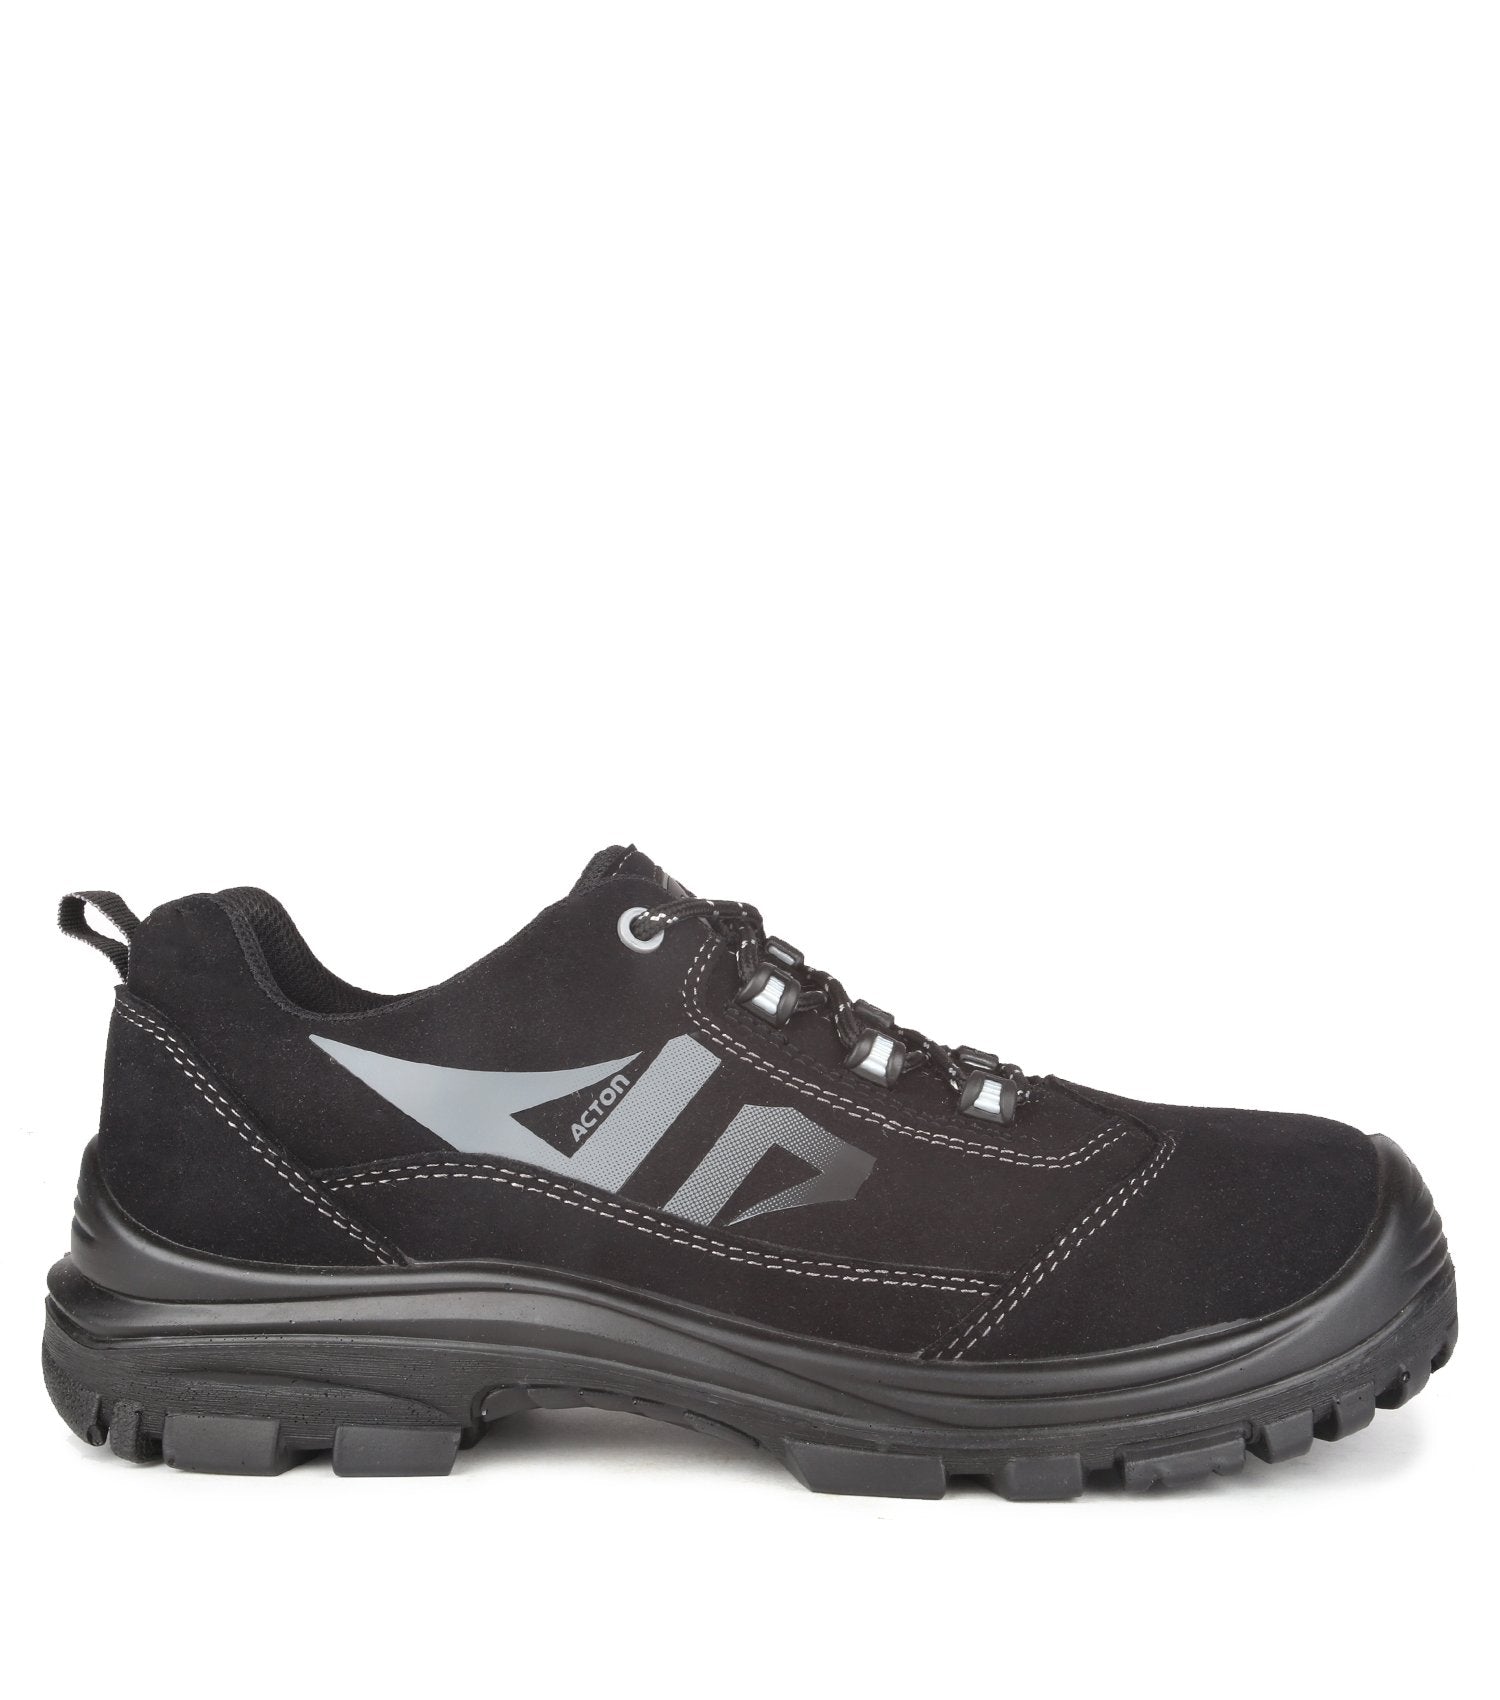 Acton Profast Flexible Metal Free Athletic Hiker Safety Shoe | Sizes 6-16 Work Boots - Cleanflow